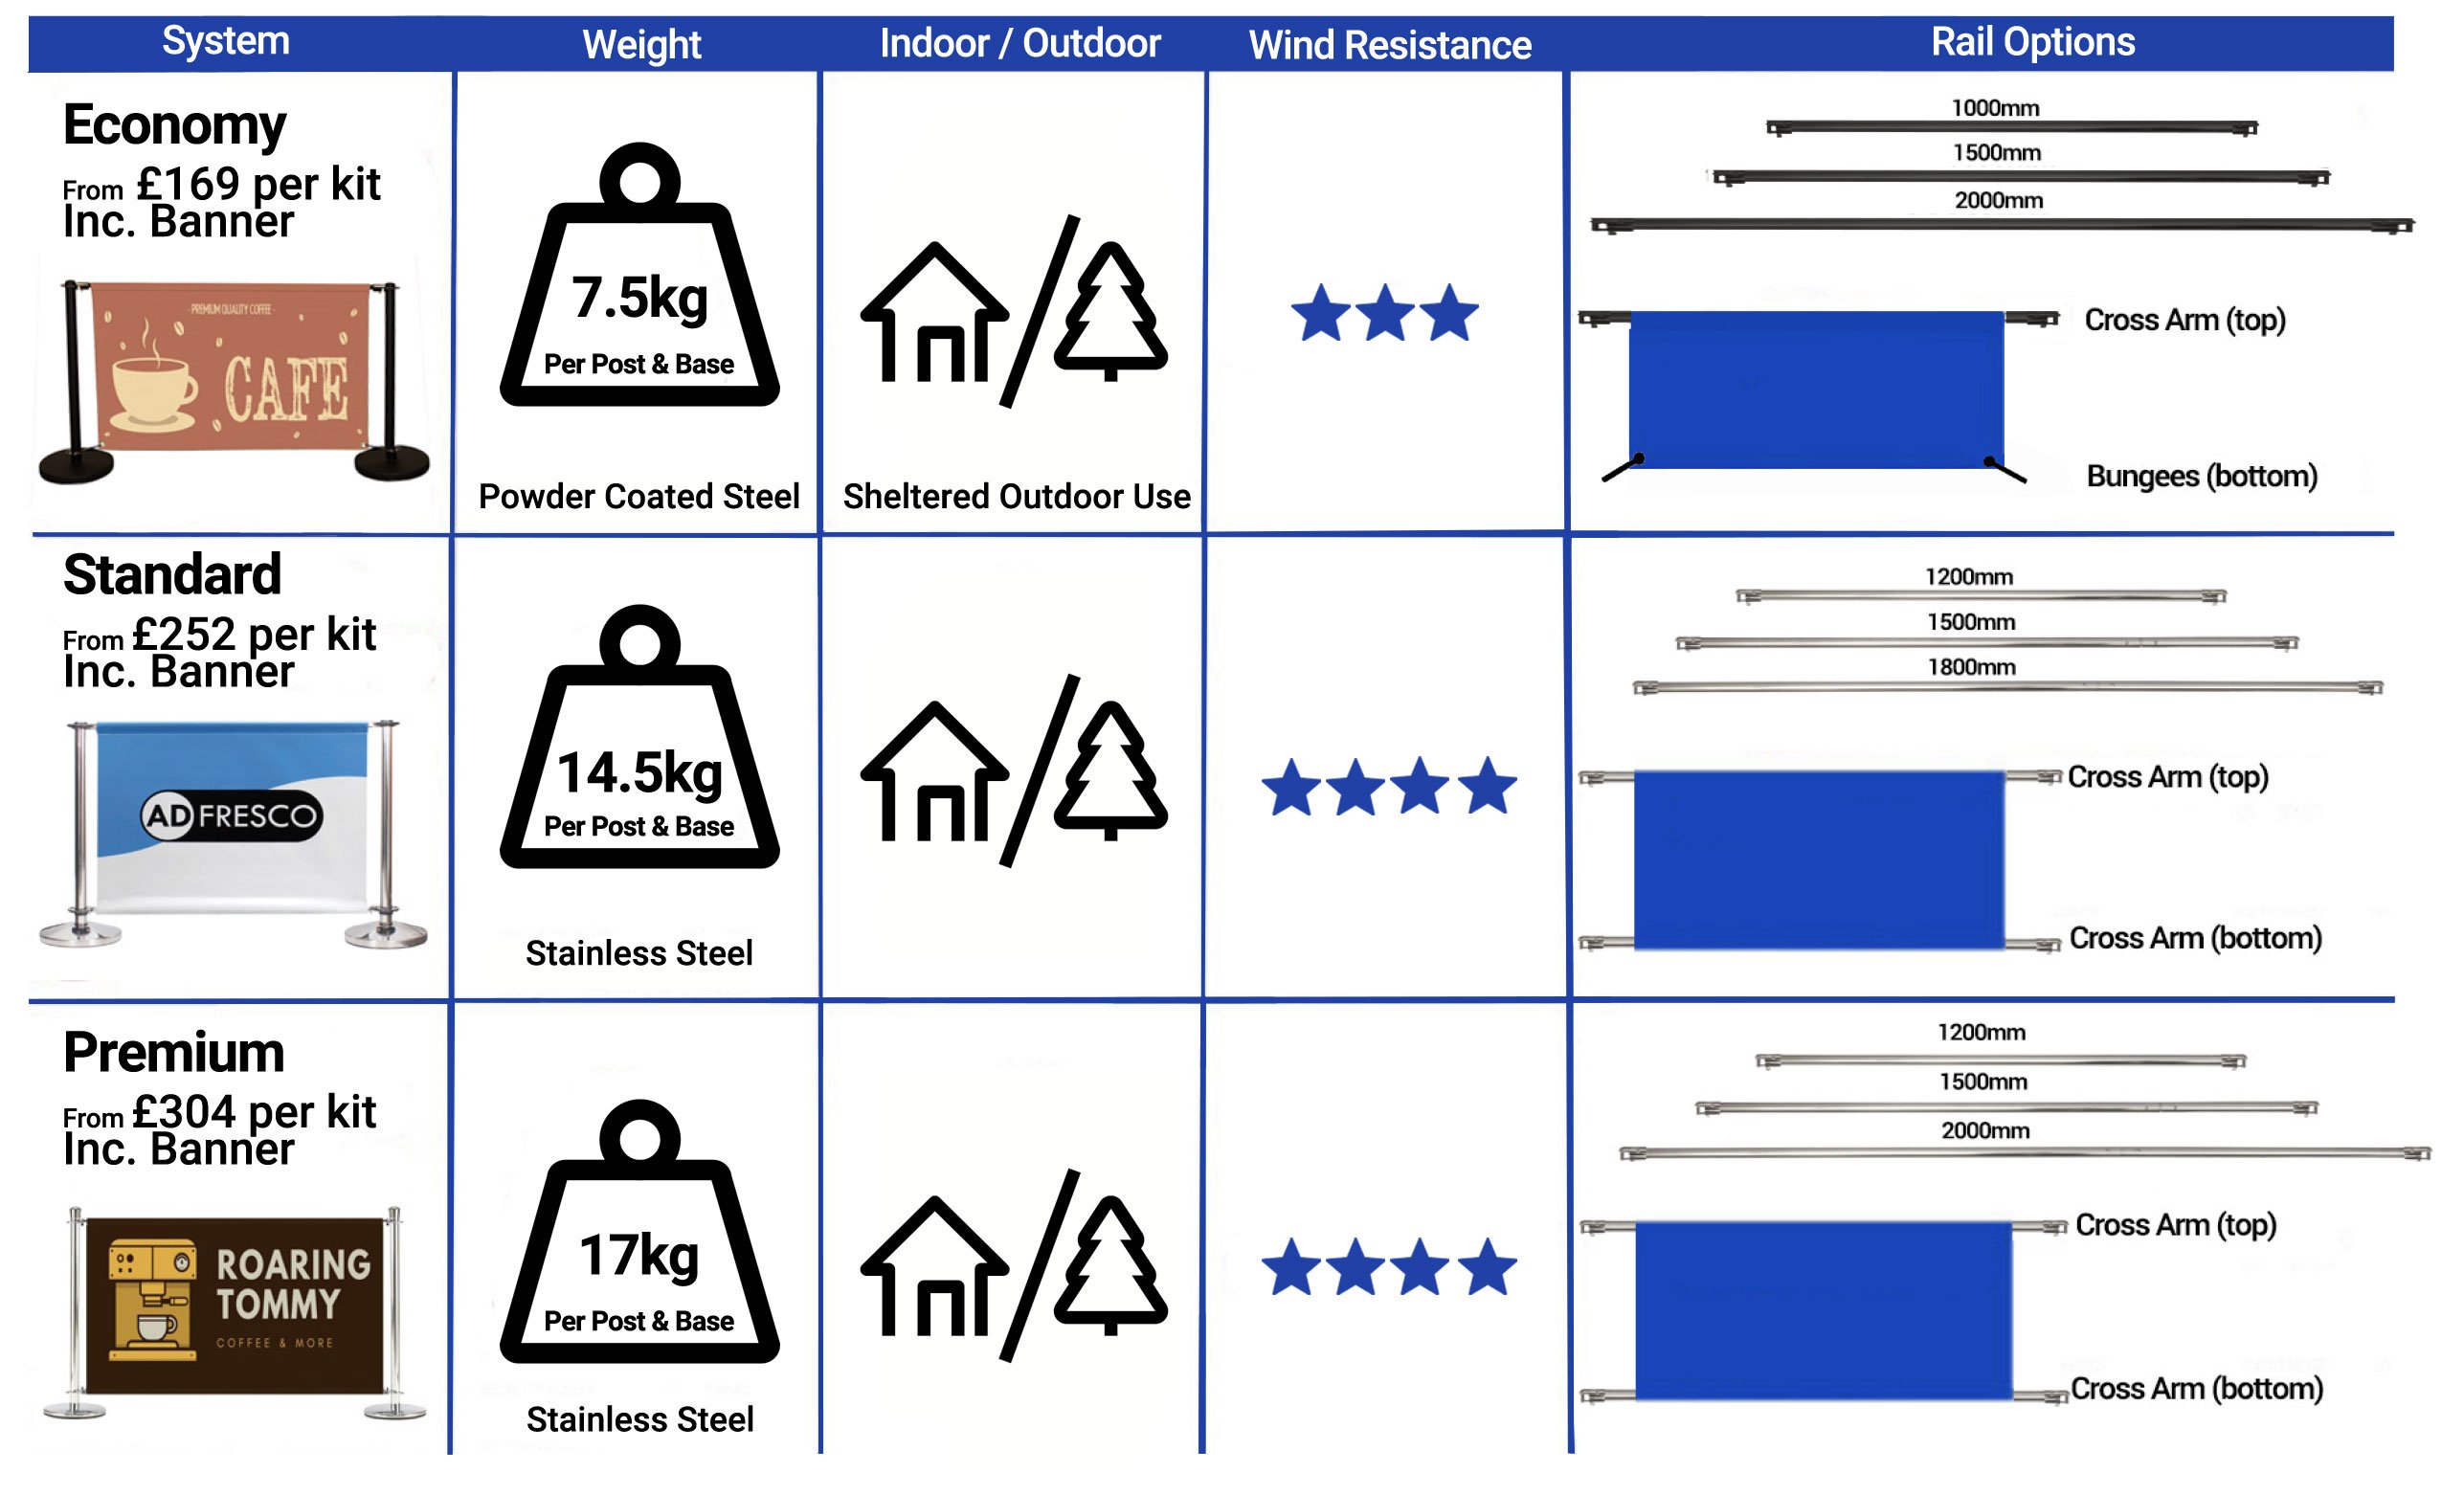 Comparative analysis of cafe barrier features for informed decisions